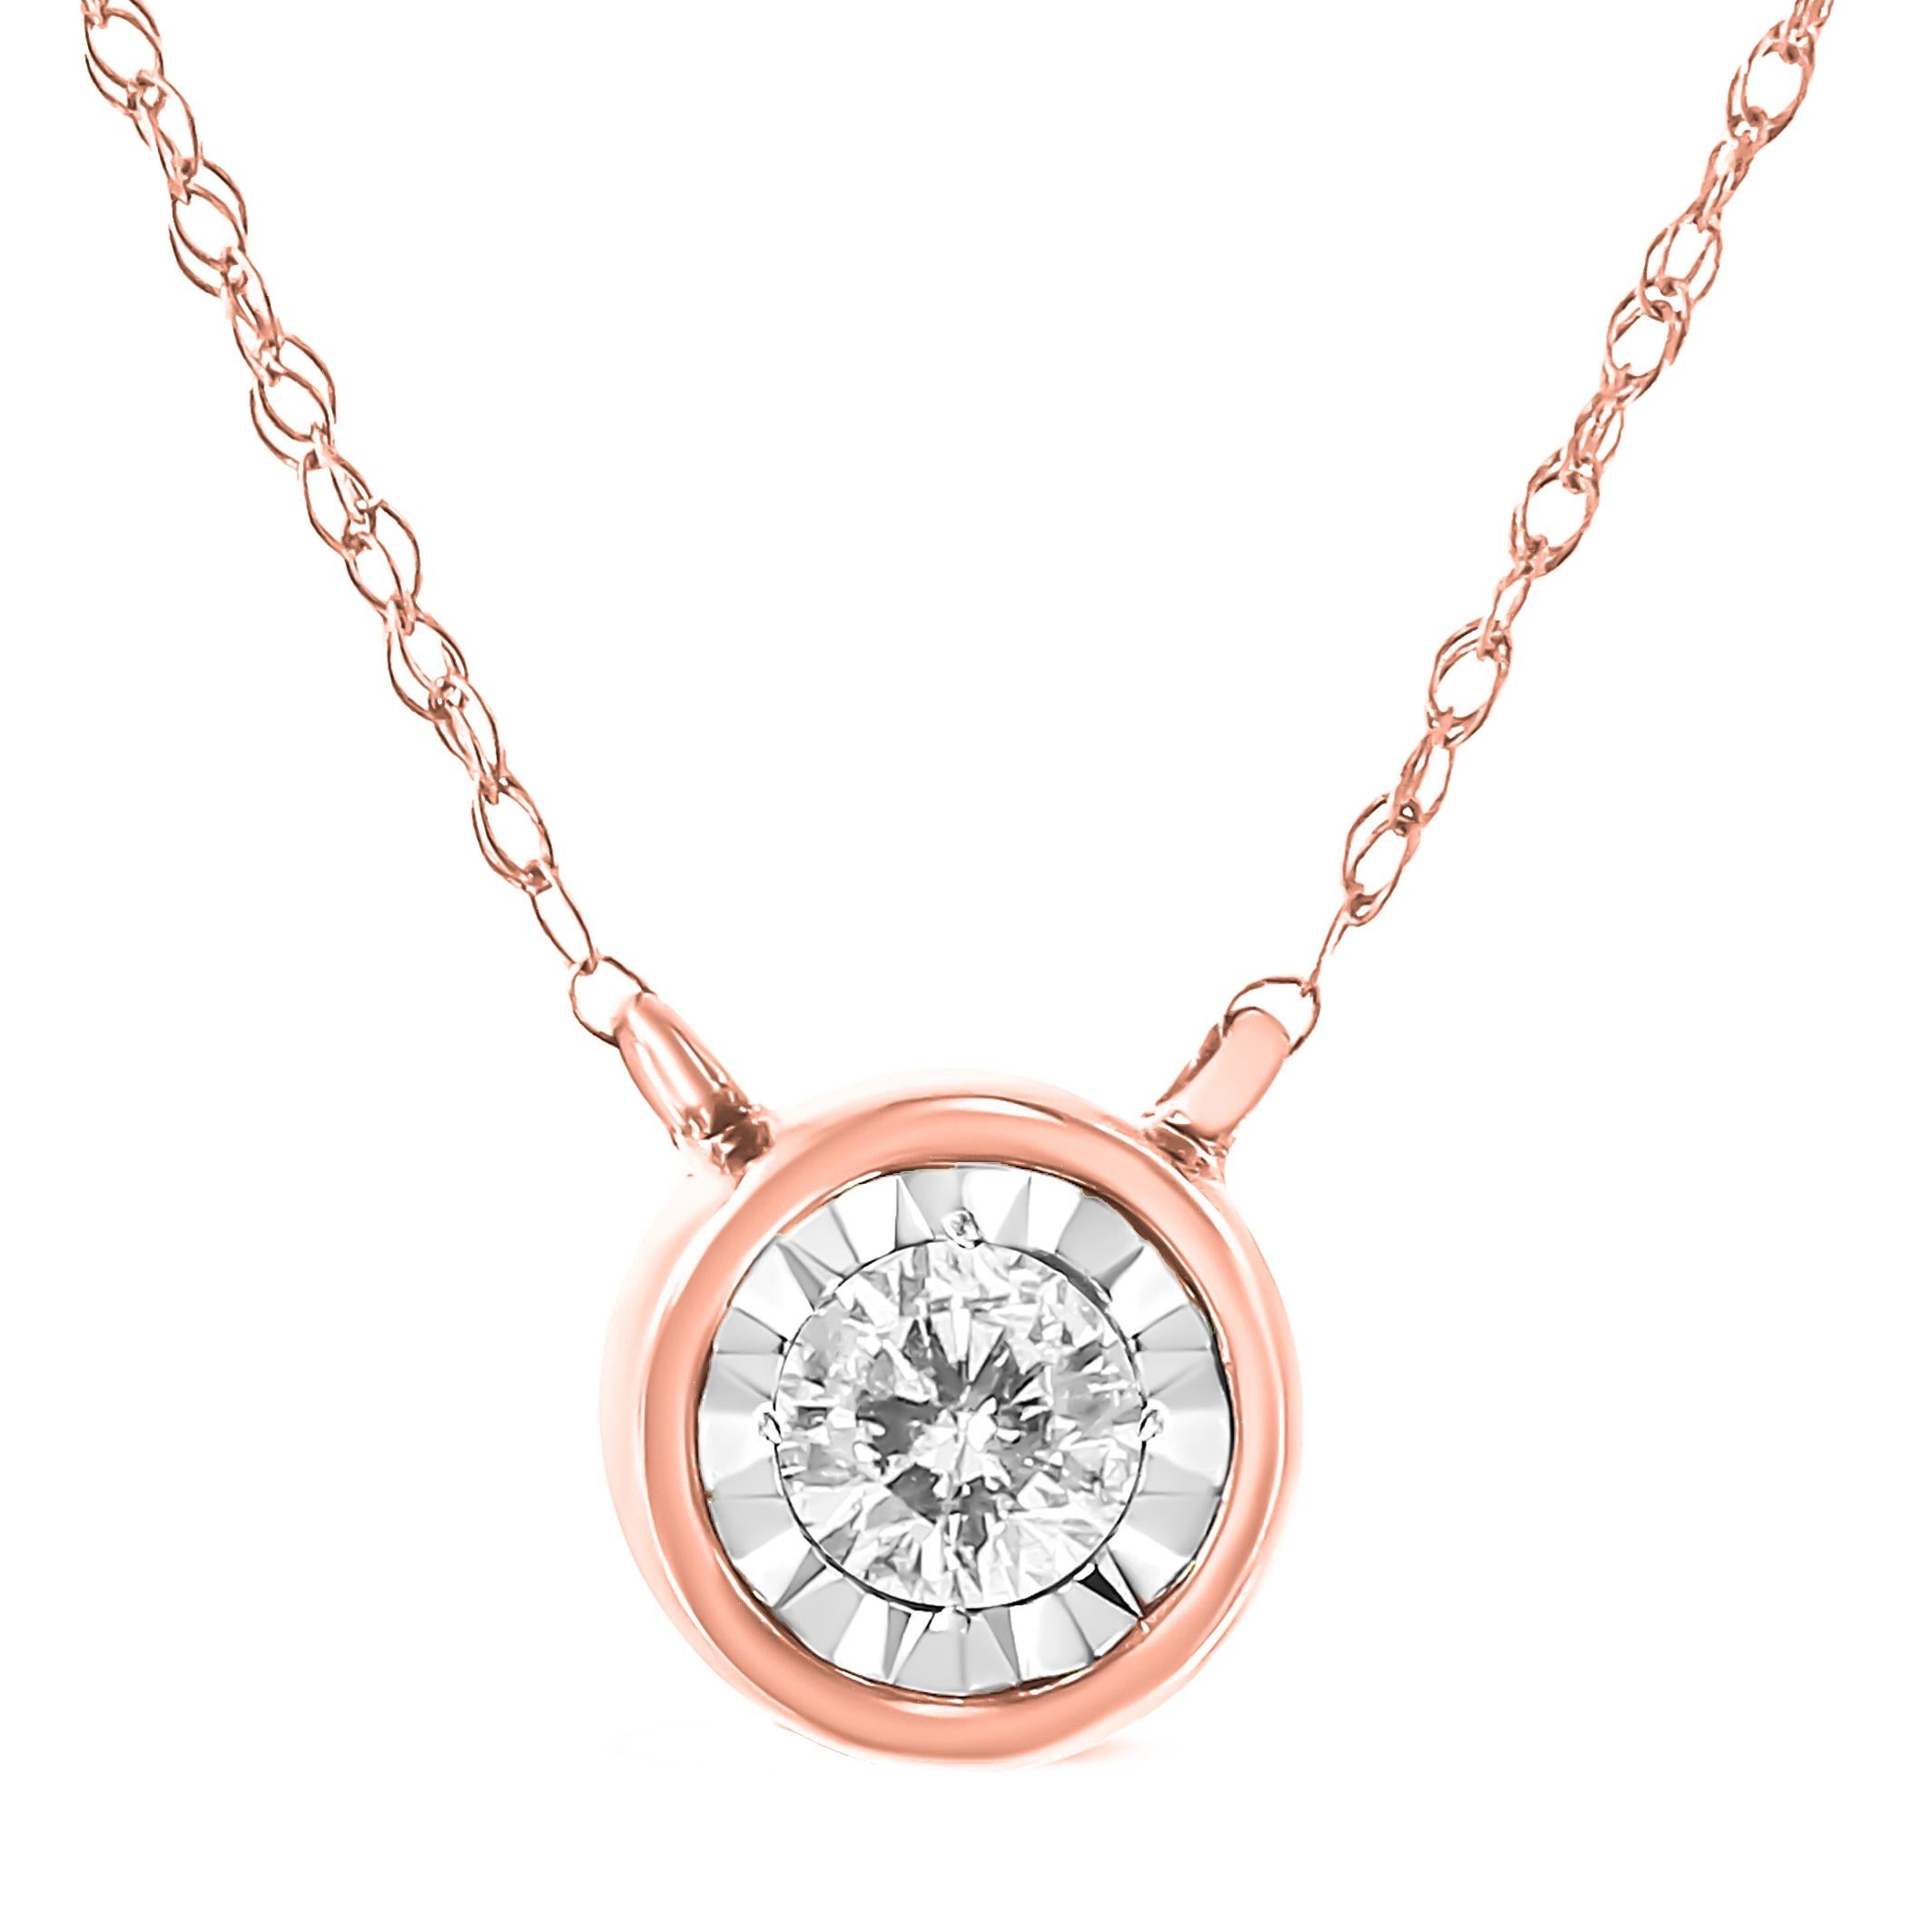 This understated yet dazzling diamond-forward piece the perfect way to highlight every big occasion, transition, and personal achievement in your life. This exquisitely simple design features your choice of either 1/5 or 1/4 cttw round brilliant cut